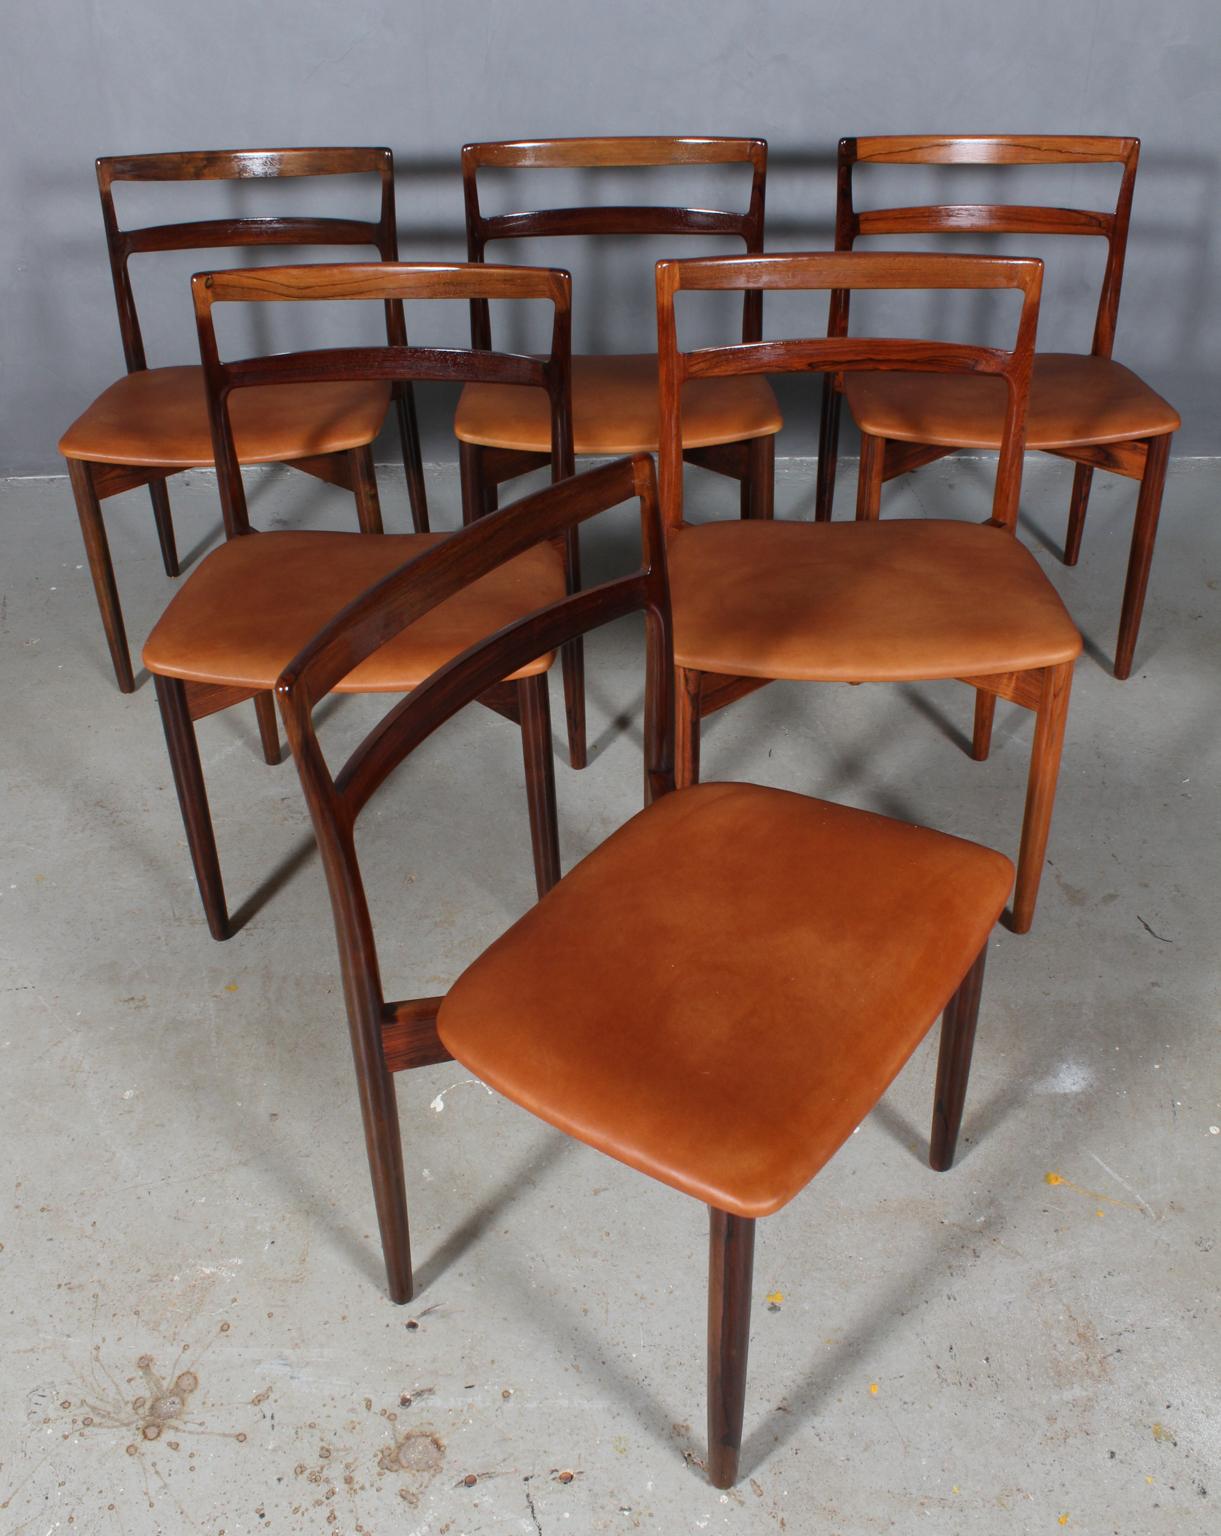 Harry Ostergaard set of six dining chairs in rosewood.

Seats new upholstered with tan aniline leather.

Made by Randers Møbelfabrik.